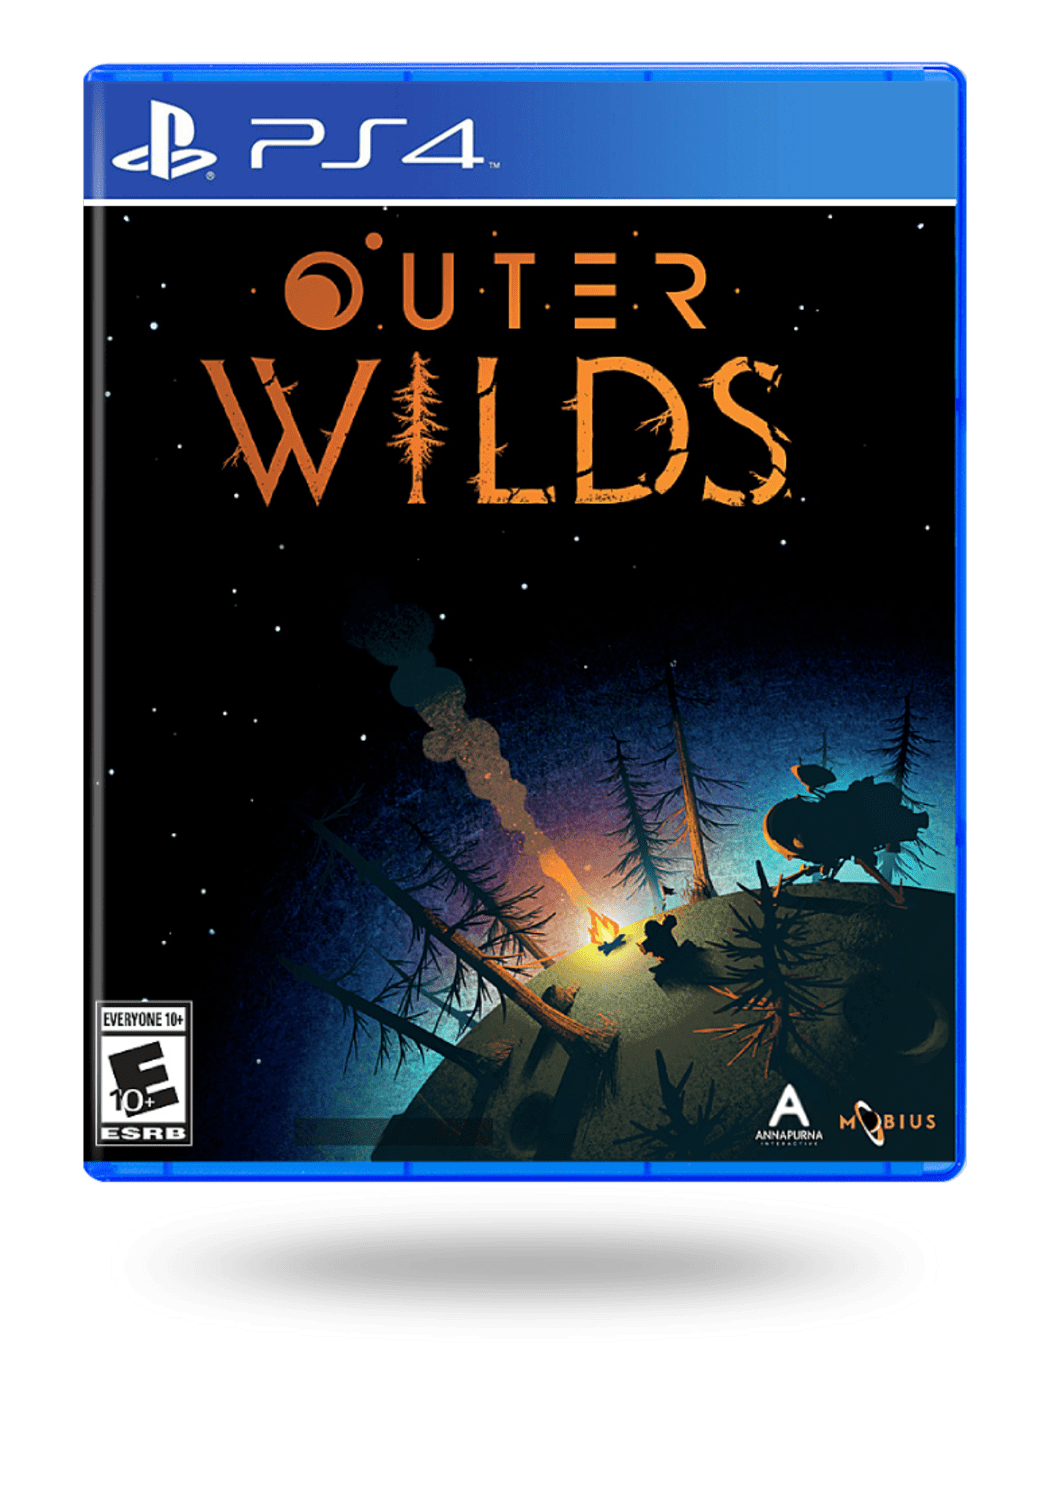 Outer Wilds  Baixe e compre hoje - Epic Games Store